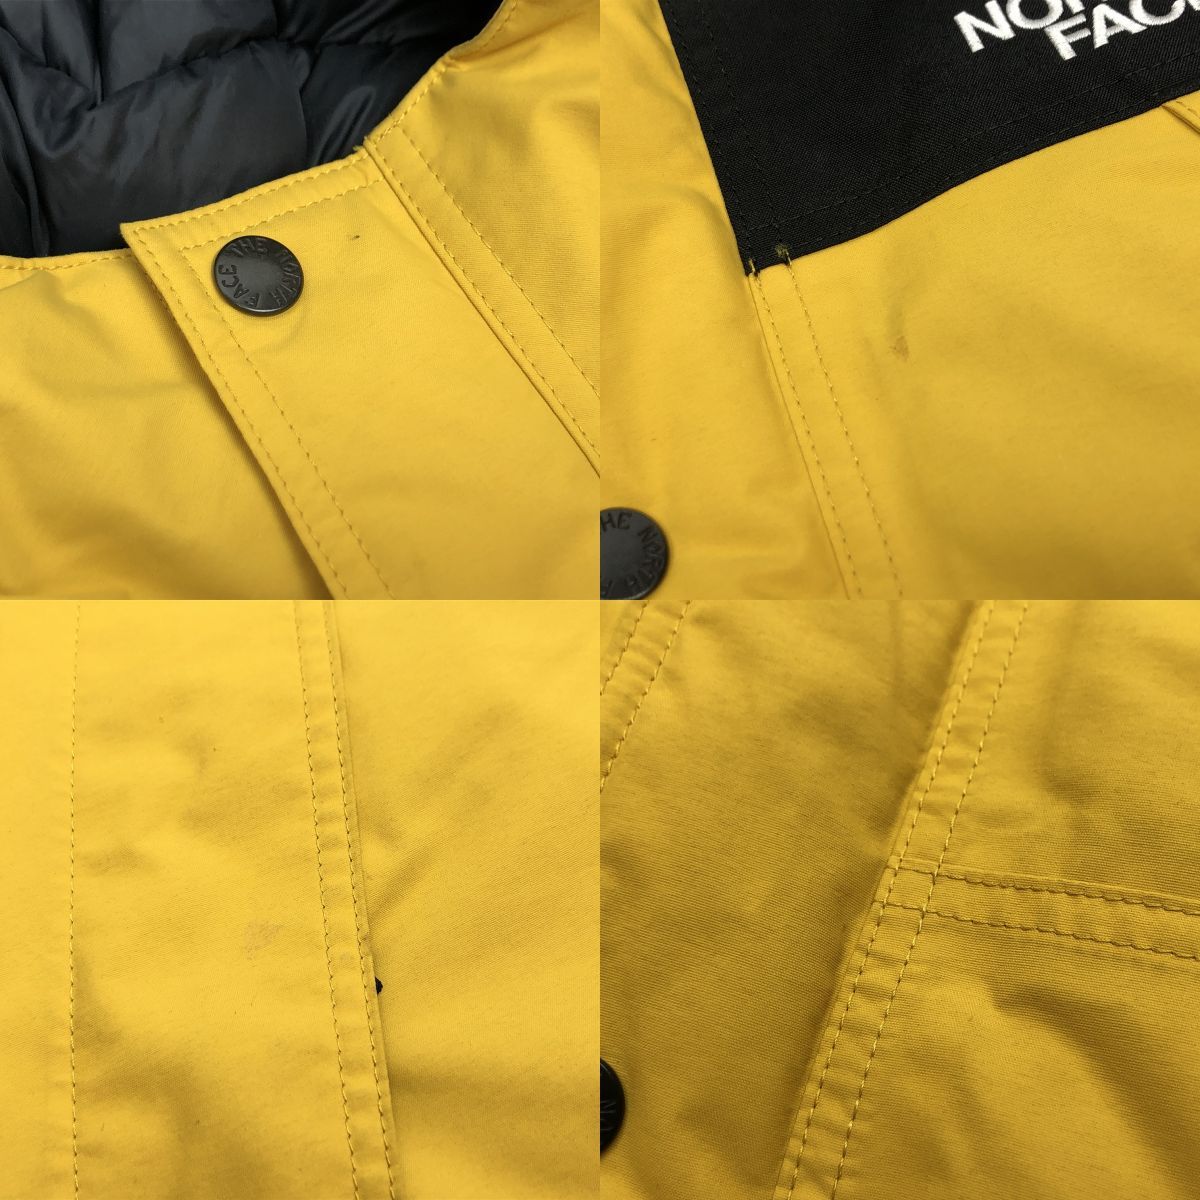 THE NORTH FACE ザ ノースフェイス ND91837 MOUNTAIN DOWN JACKET GORE 